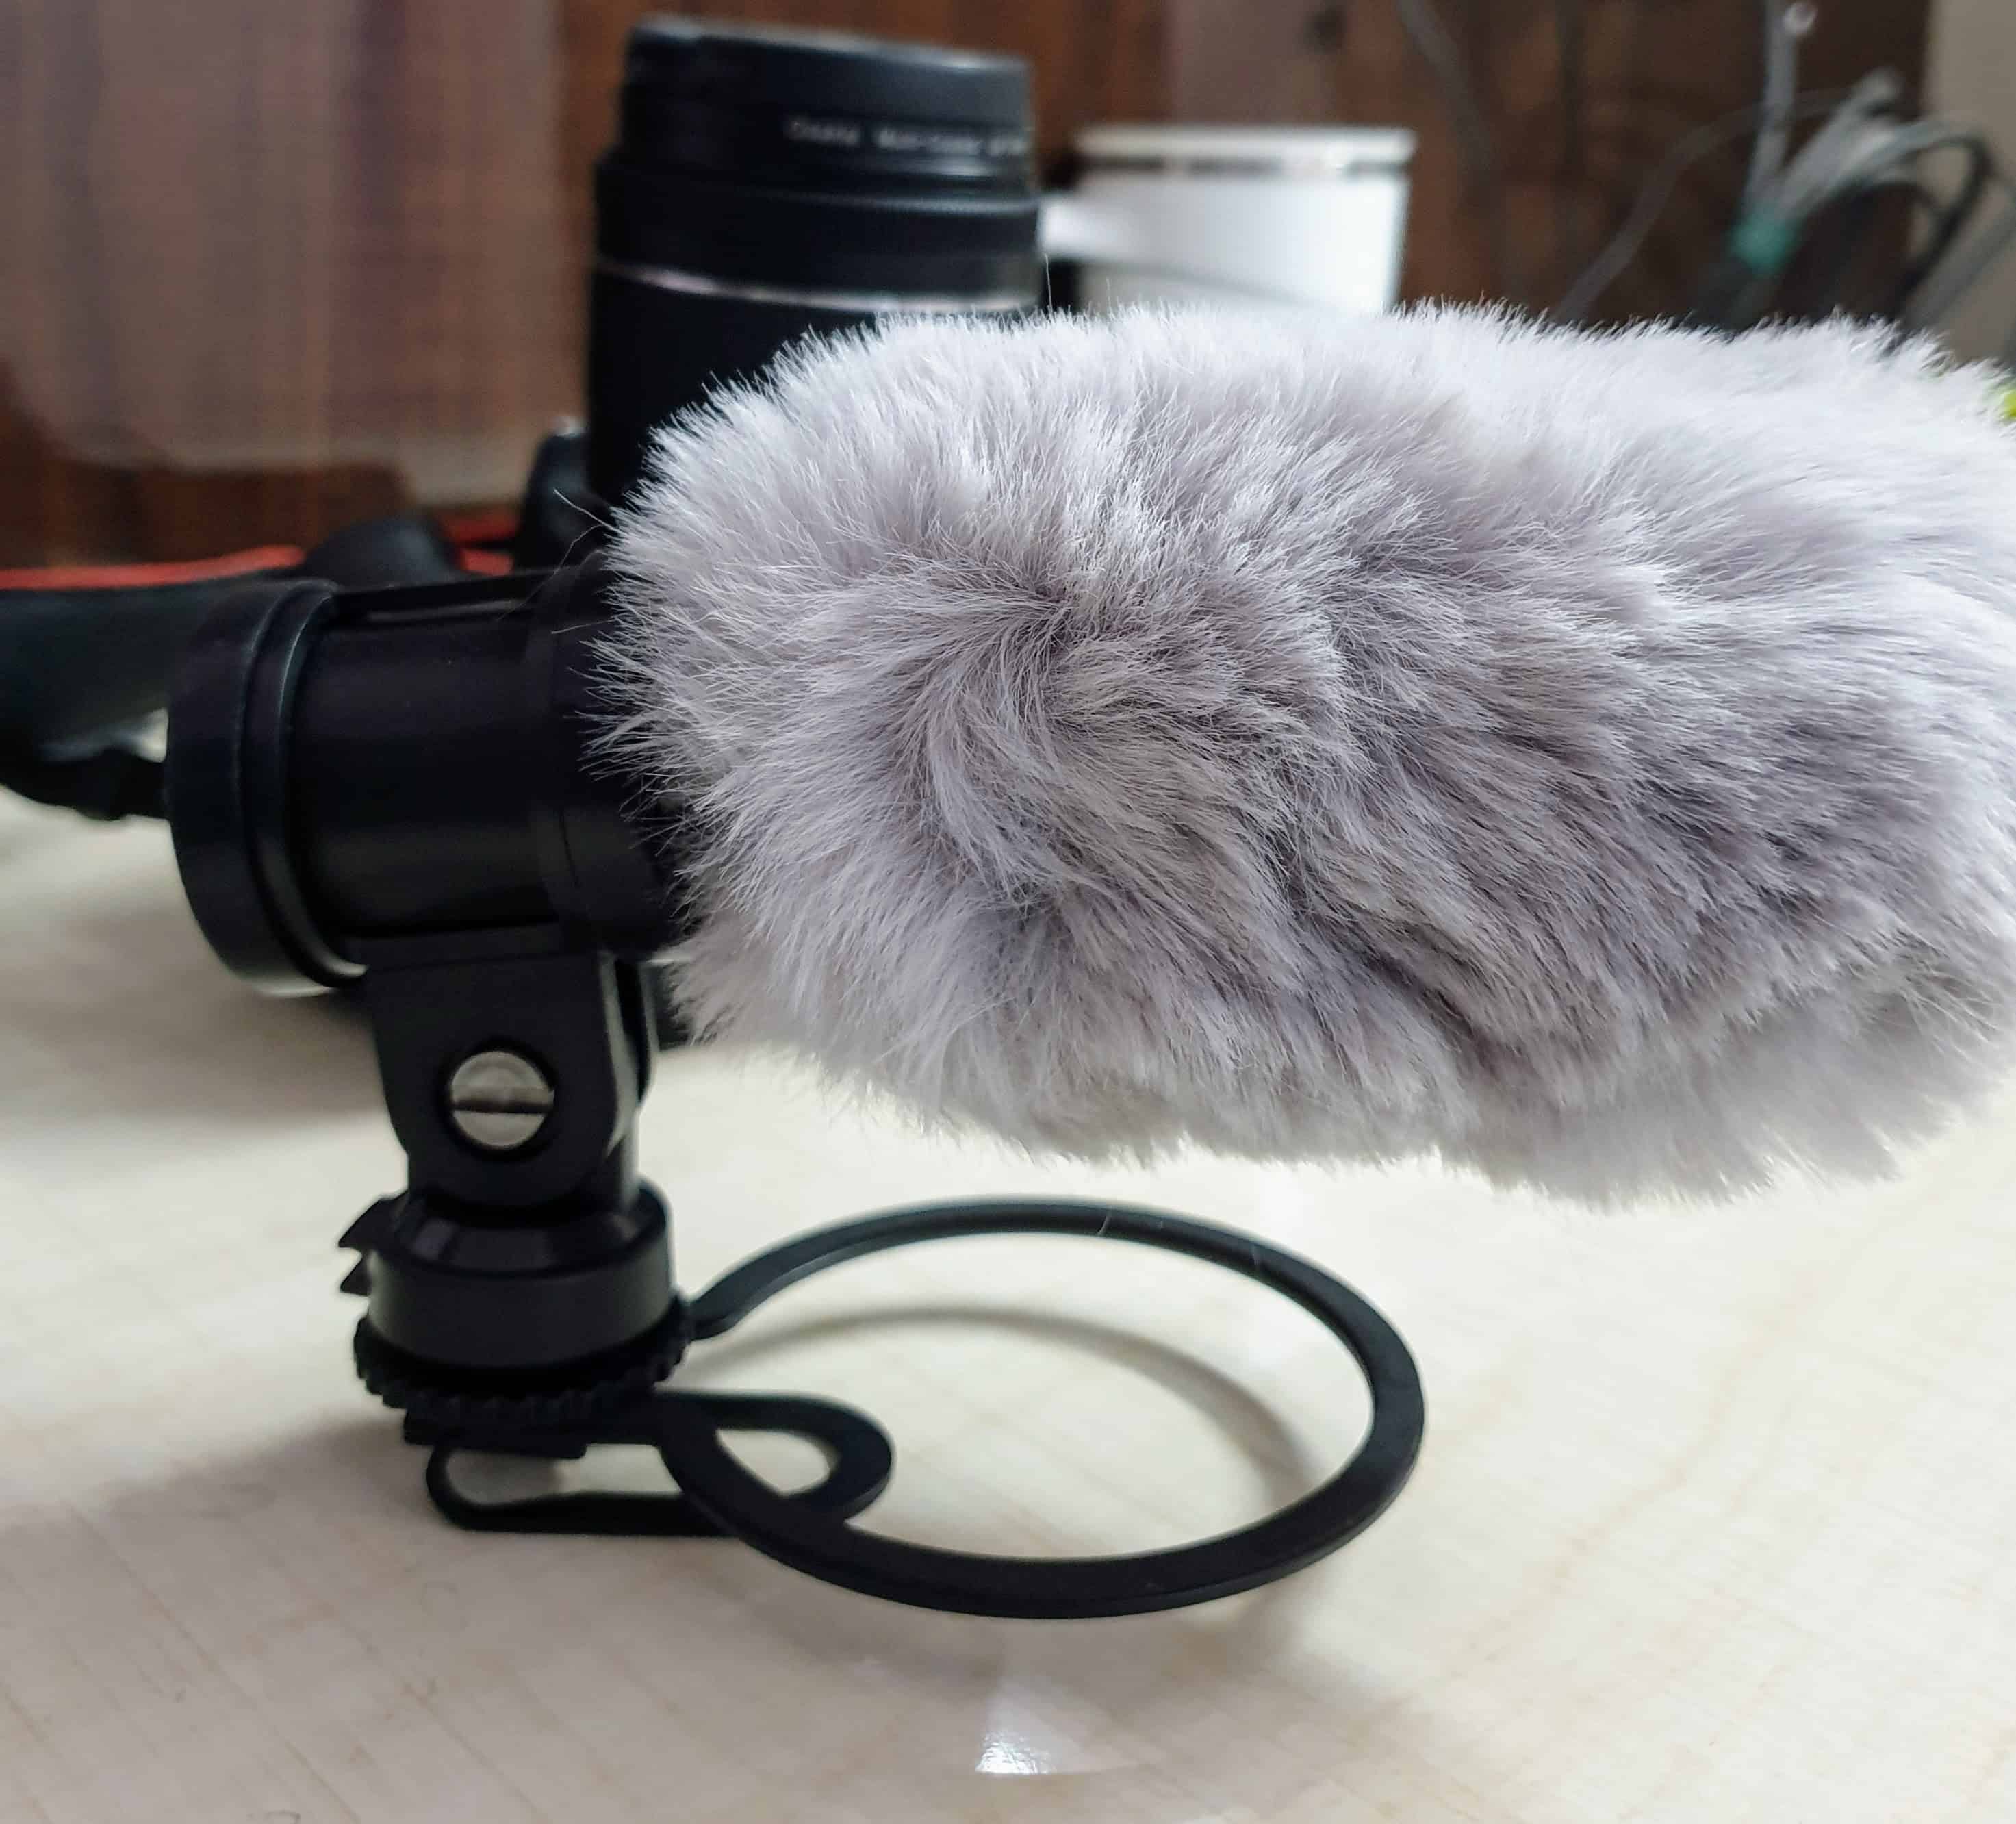 AVerMedia Live Streamer MIC 133 Review - A Must-Have Accessory for Content Creators! - 6